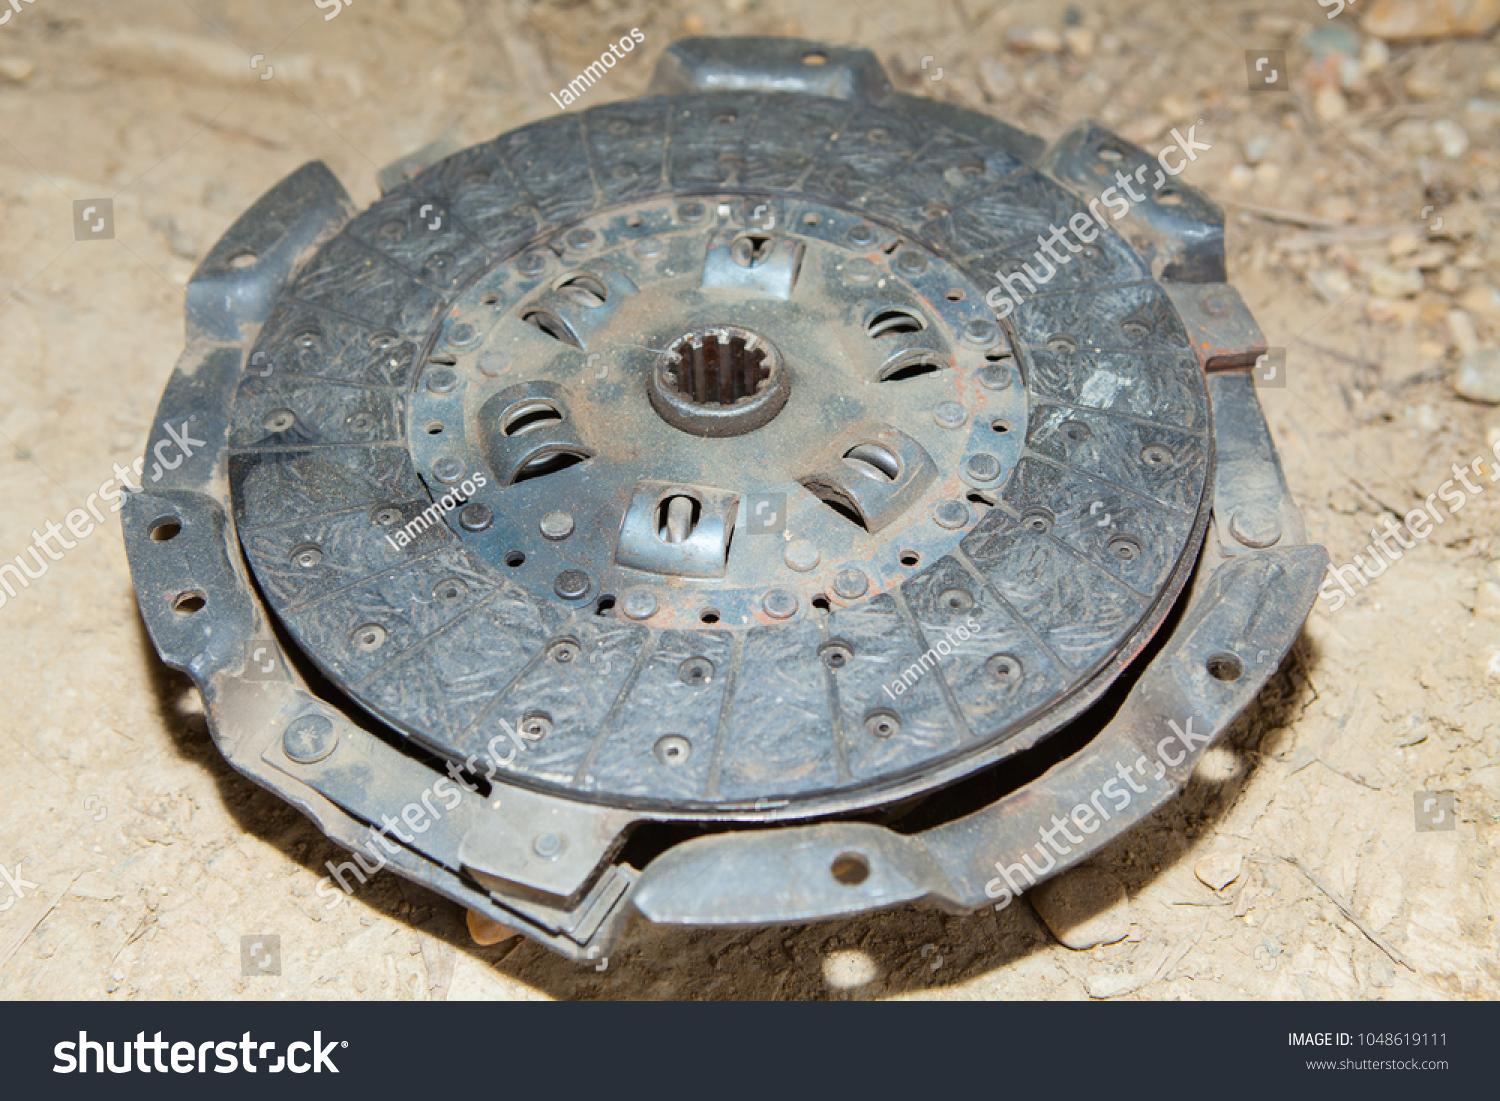 Forklift Series Car Clutch Objects Stock Image 1048619111